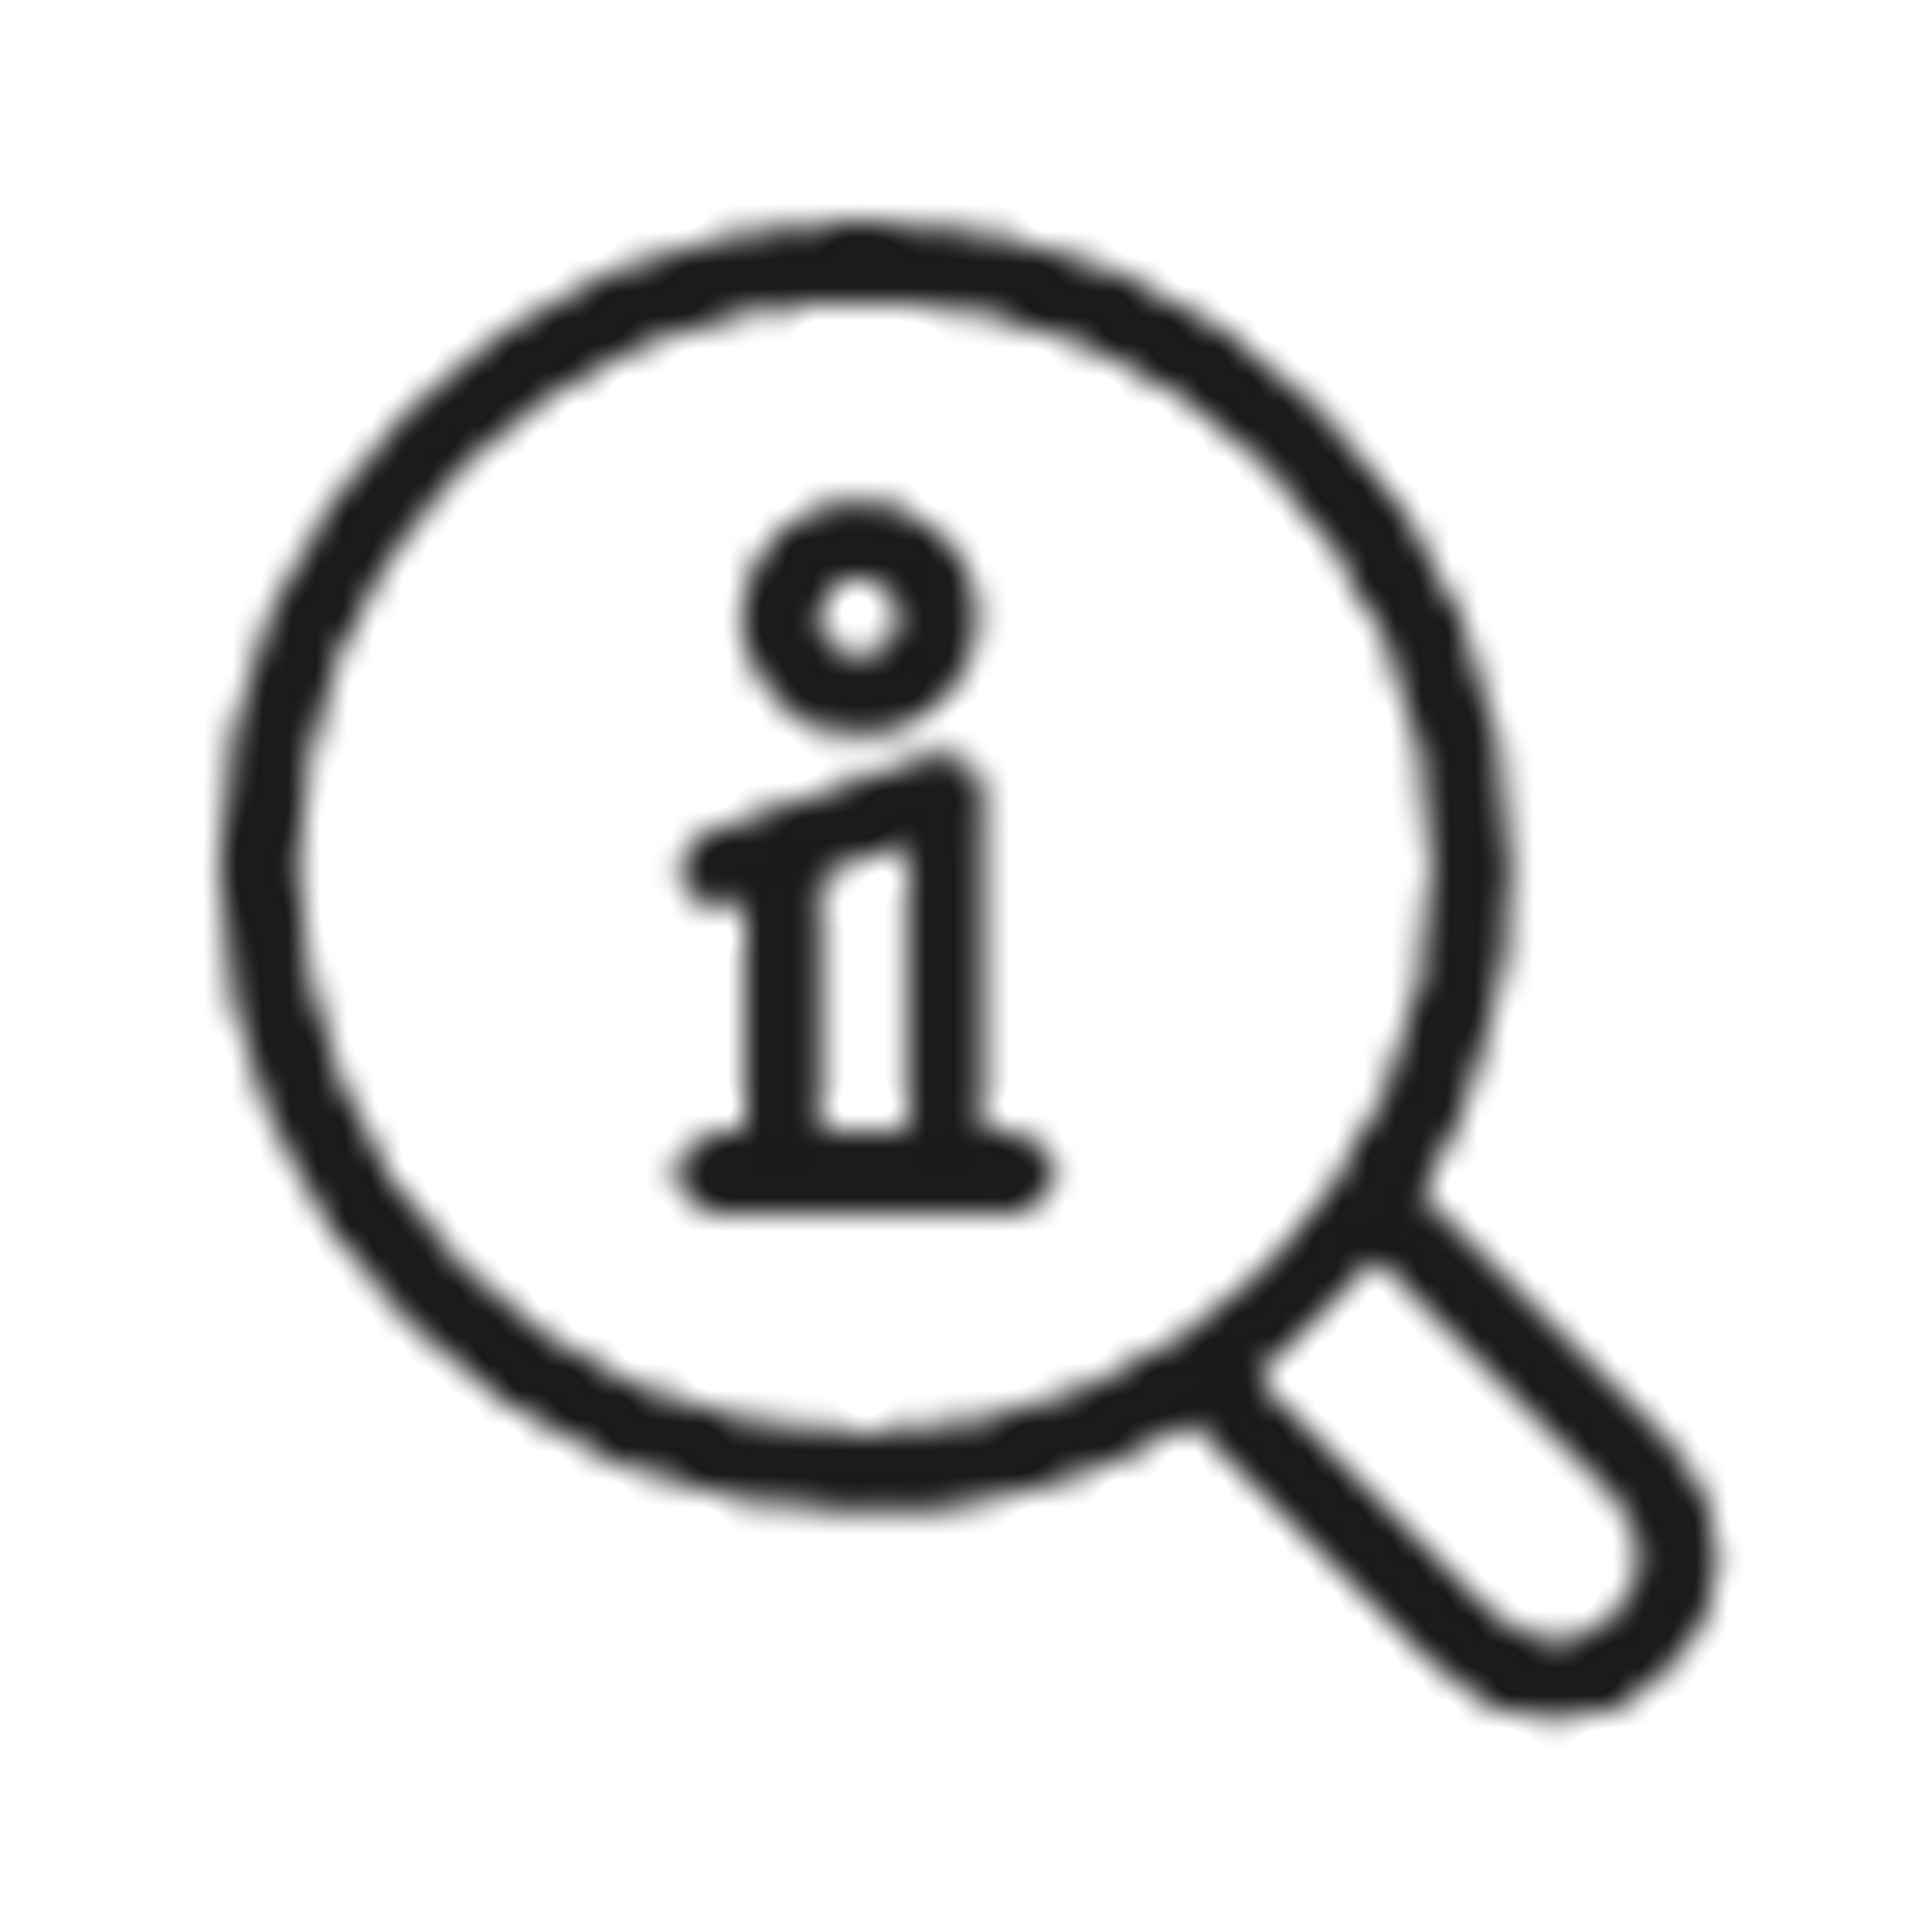 magnifying glass with an 'i' inside icon